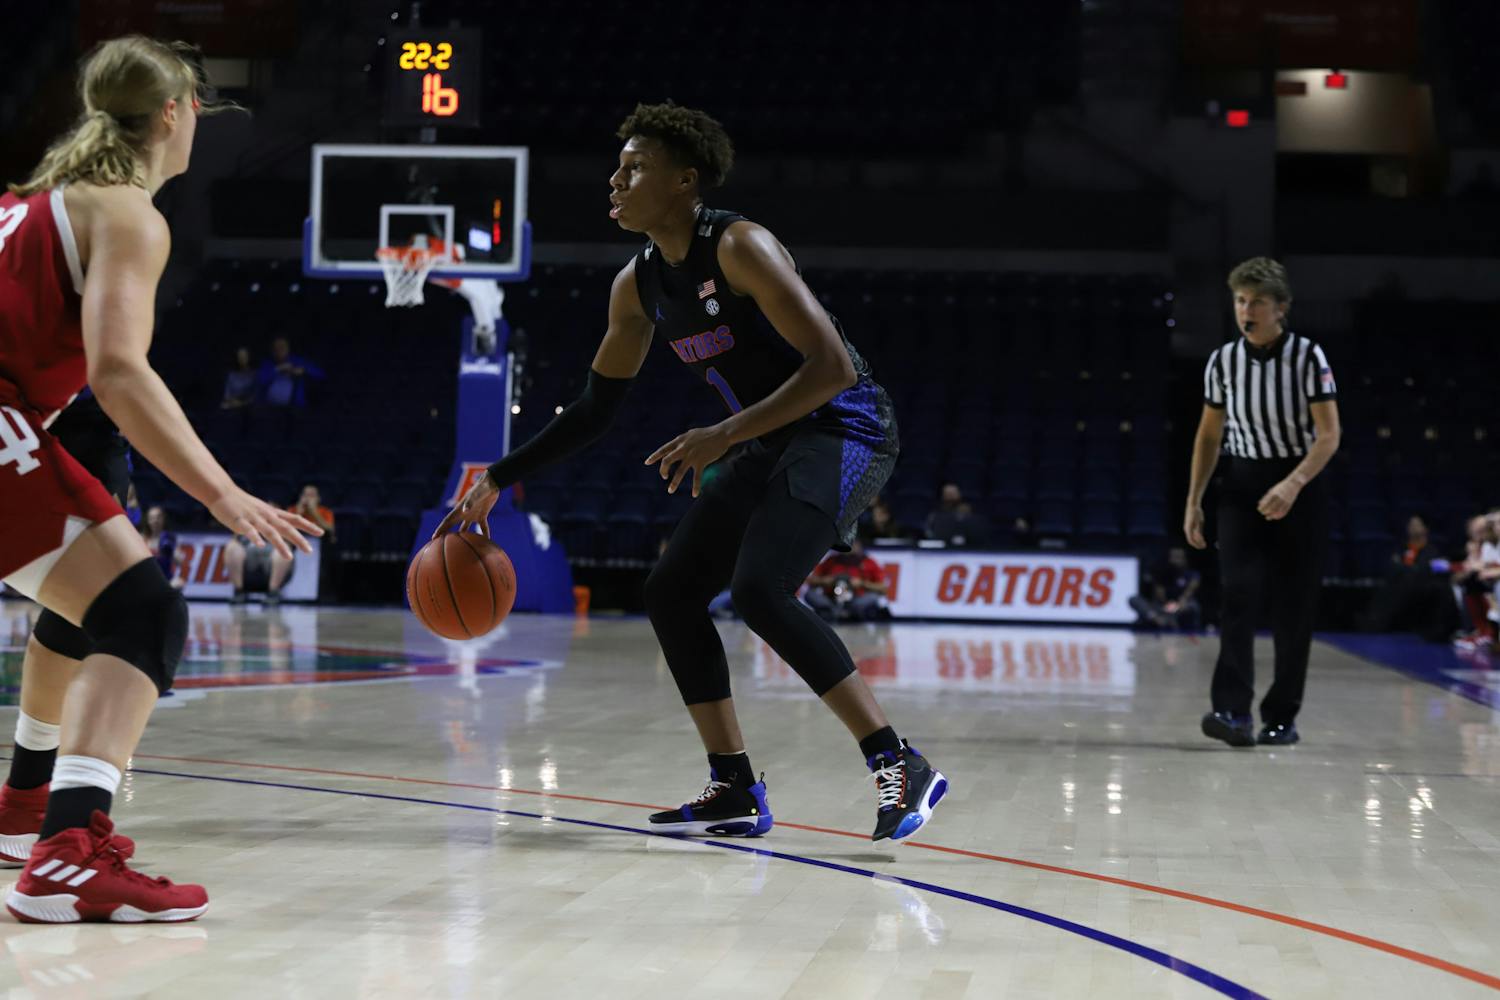 Florida guard Kiara Smith contributed 15 points to her squad's win over Charleston Southern Wednesday.